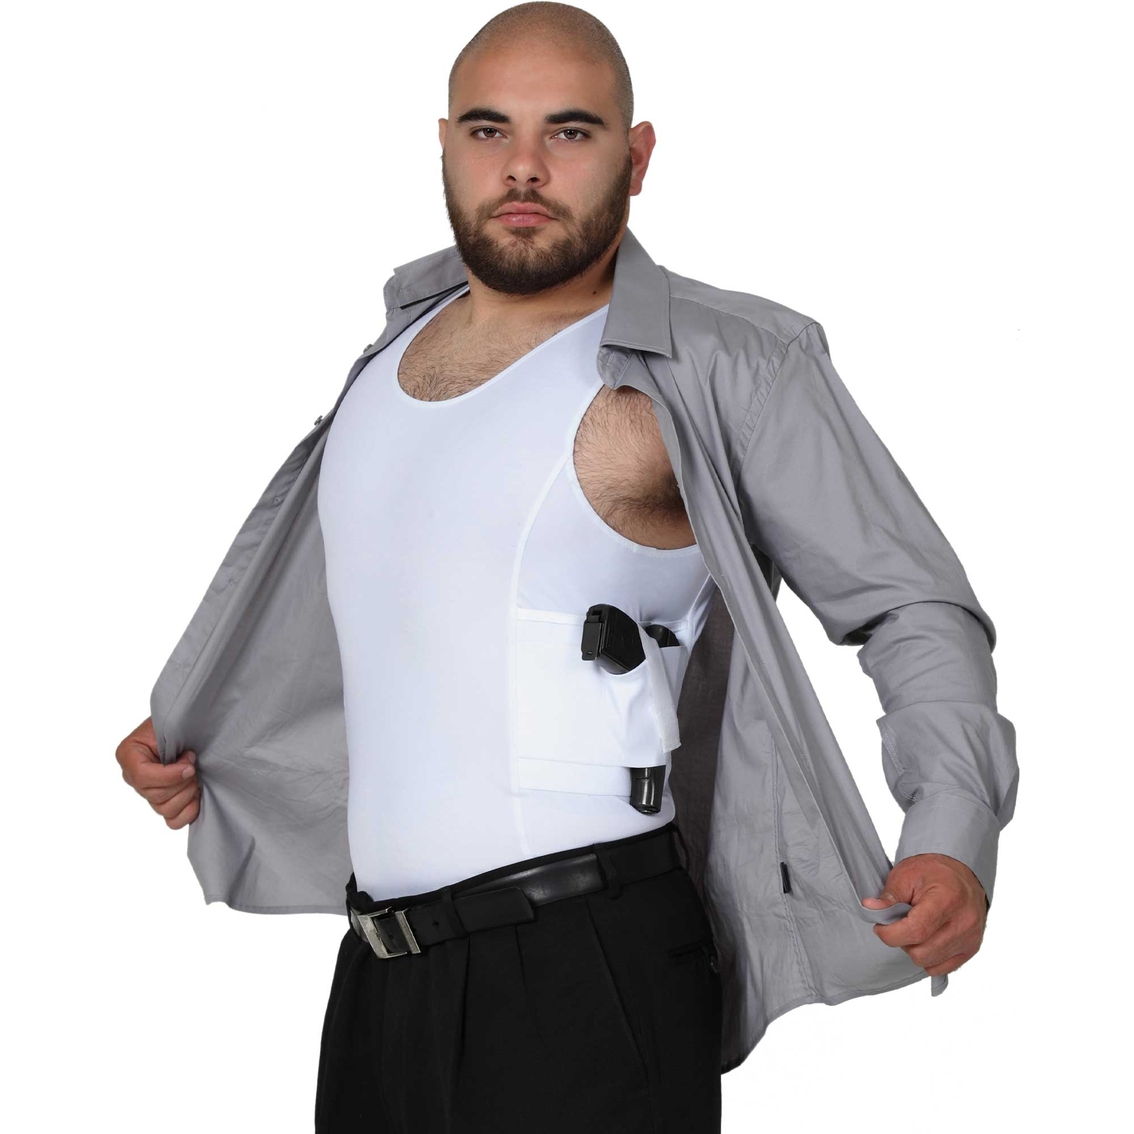 ISPro Tactical Concealed Carry Muscle Tank - Image 6 of 7